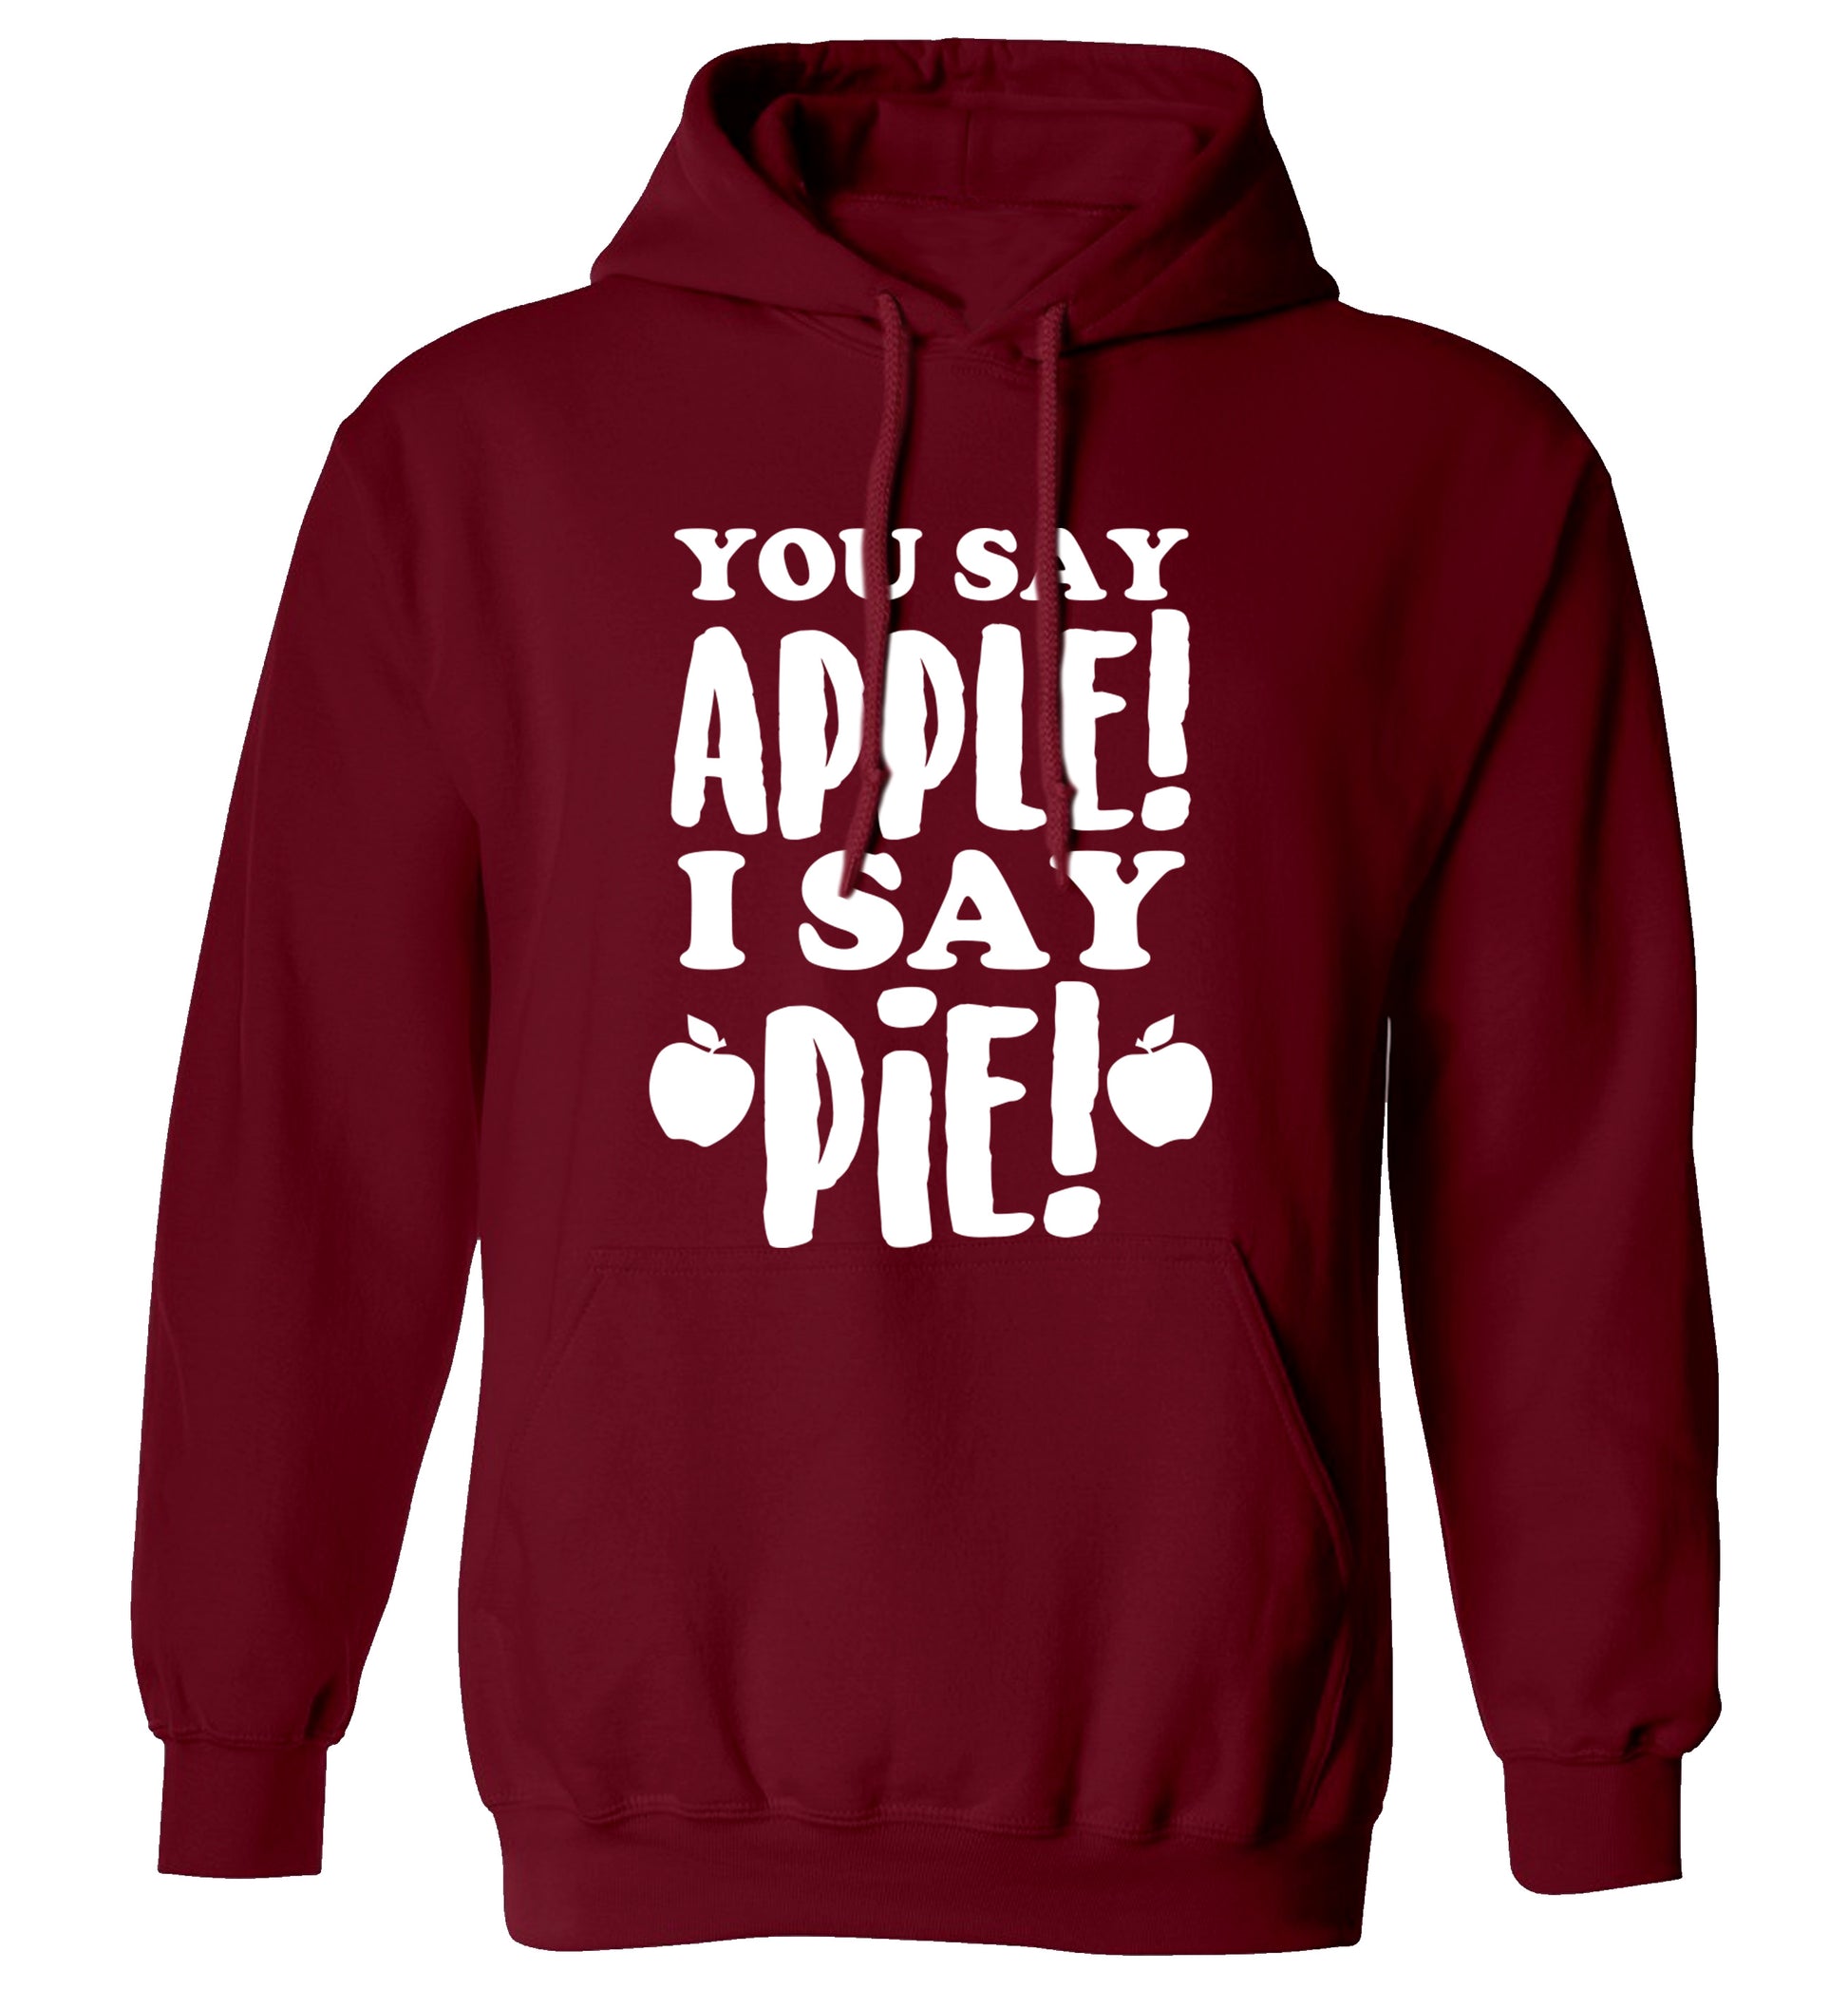 You say apple I say pie! adults unisex maroon hoodie 2XL